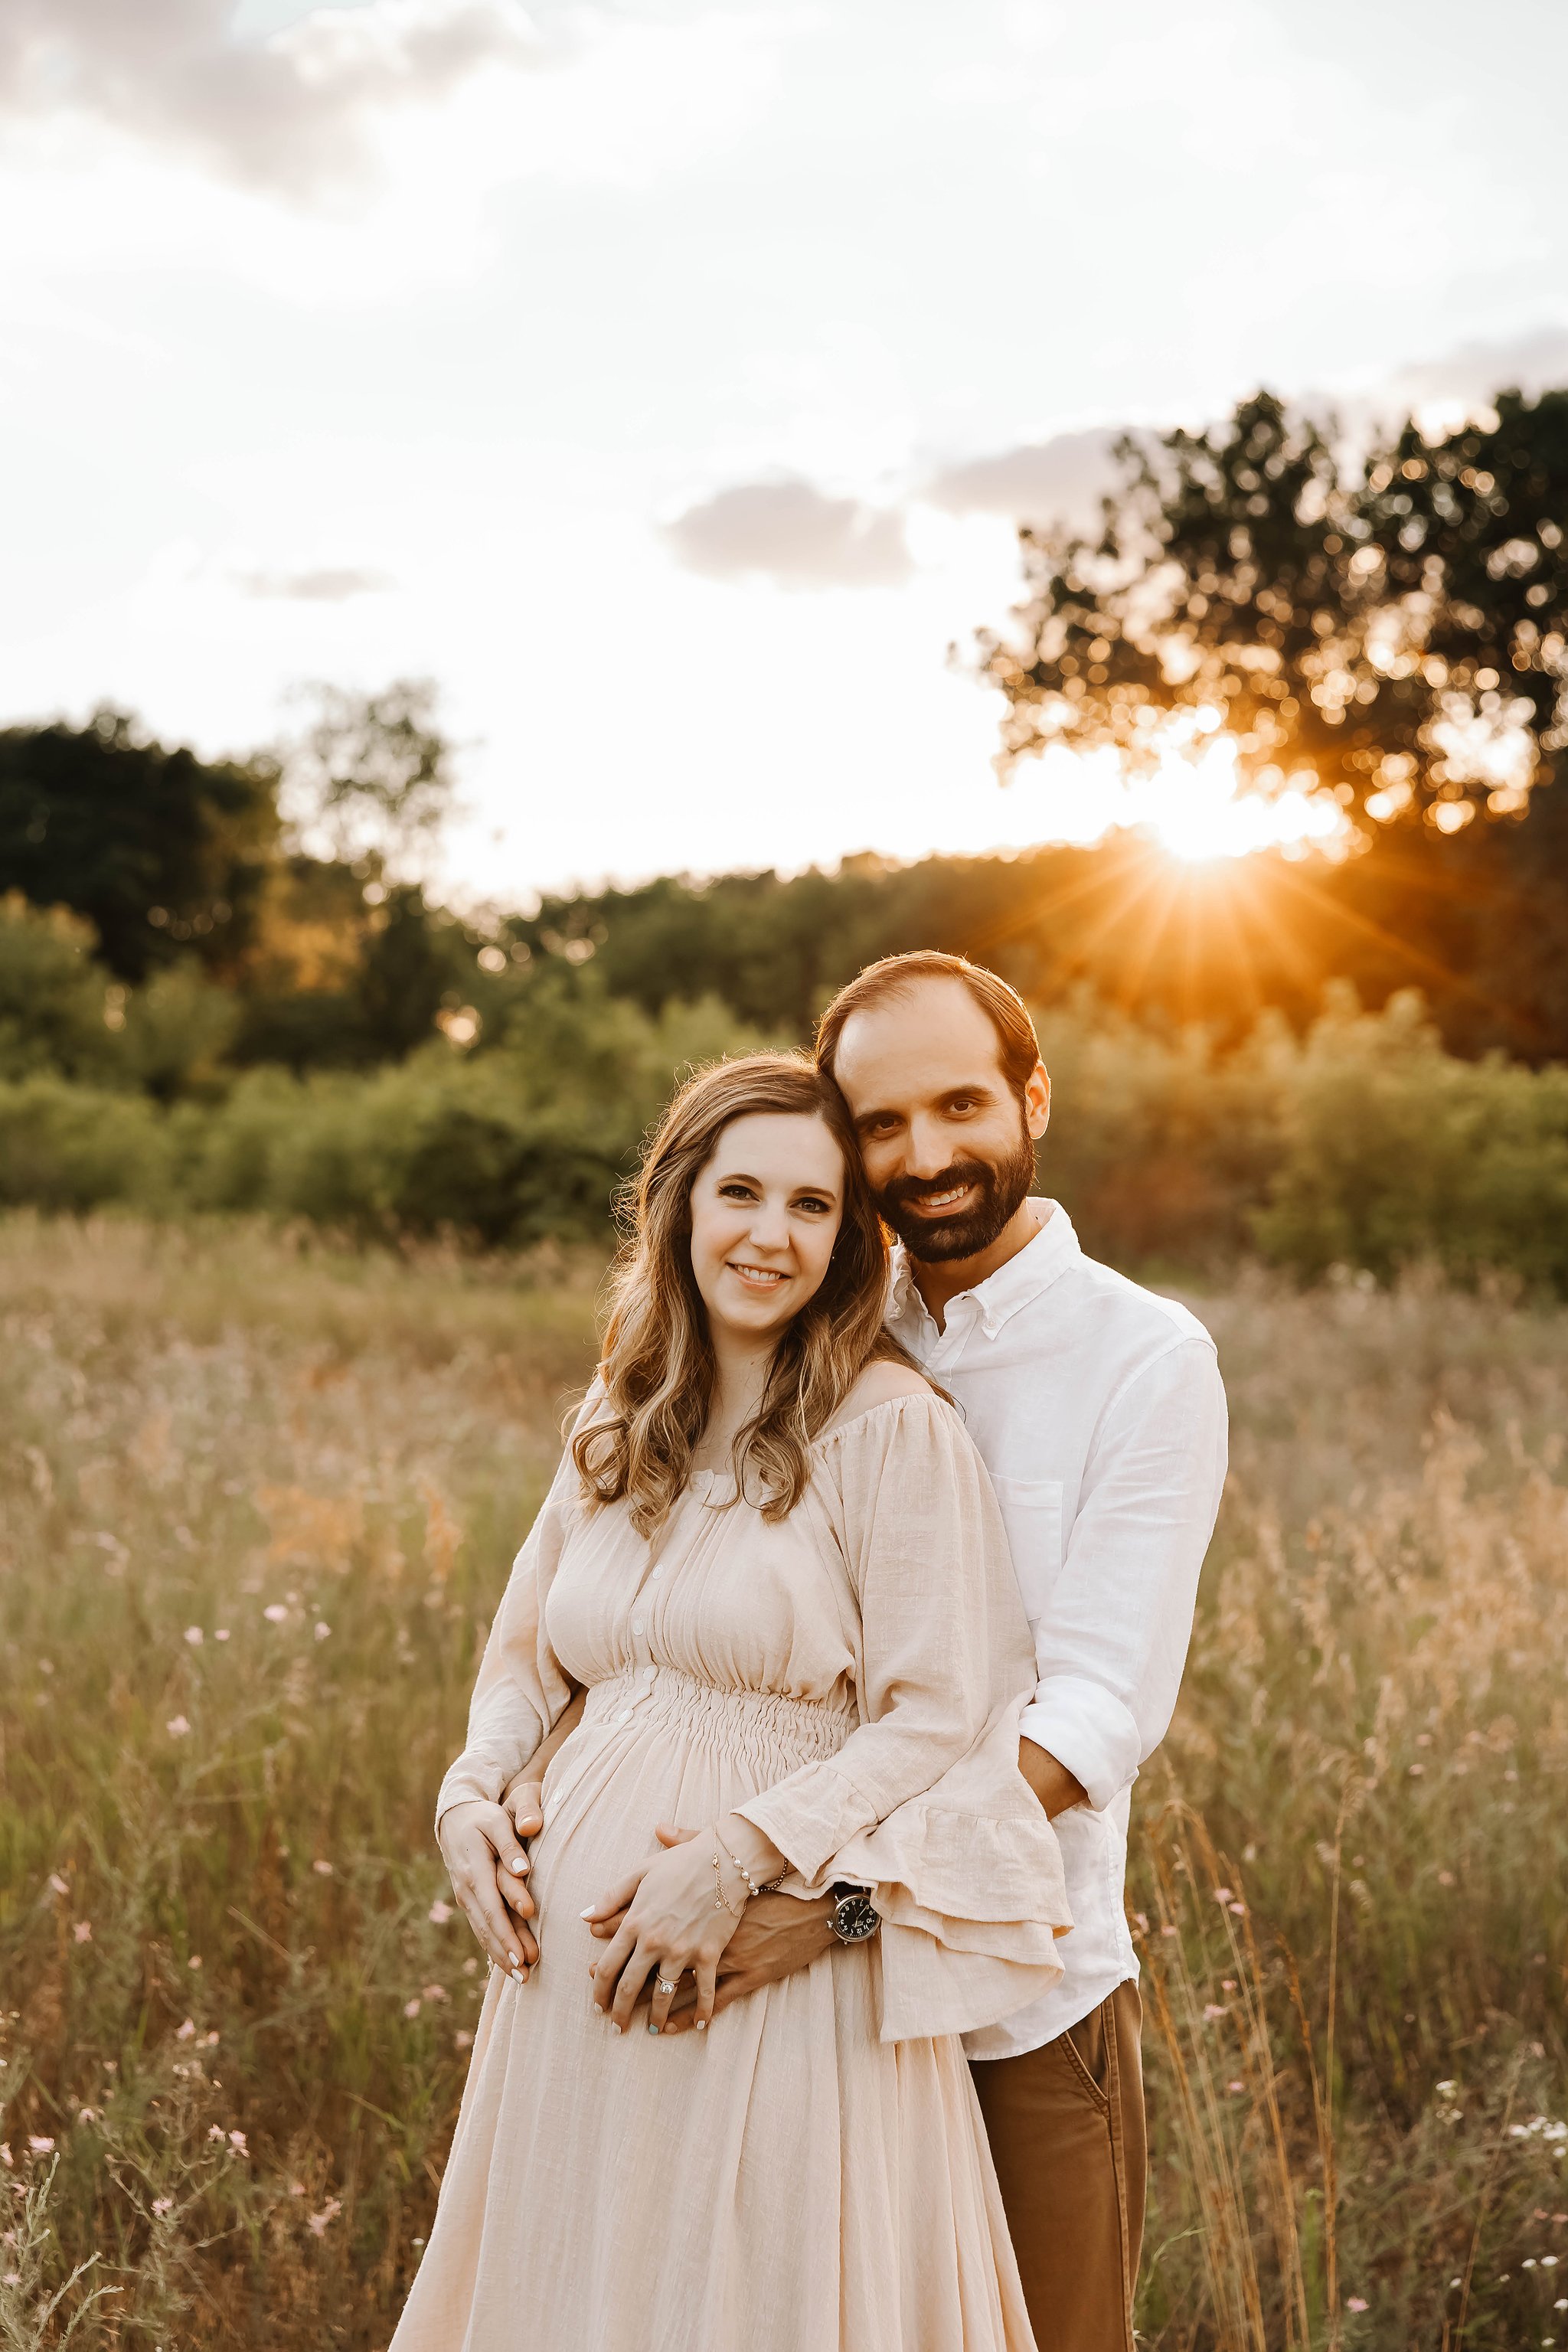 maternity photographer with dresses rochester hills mi